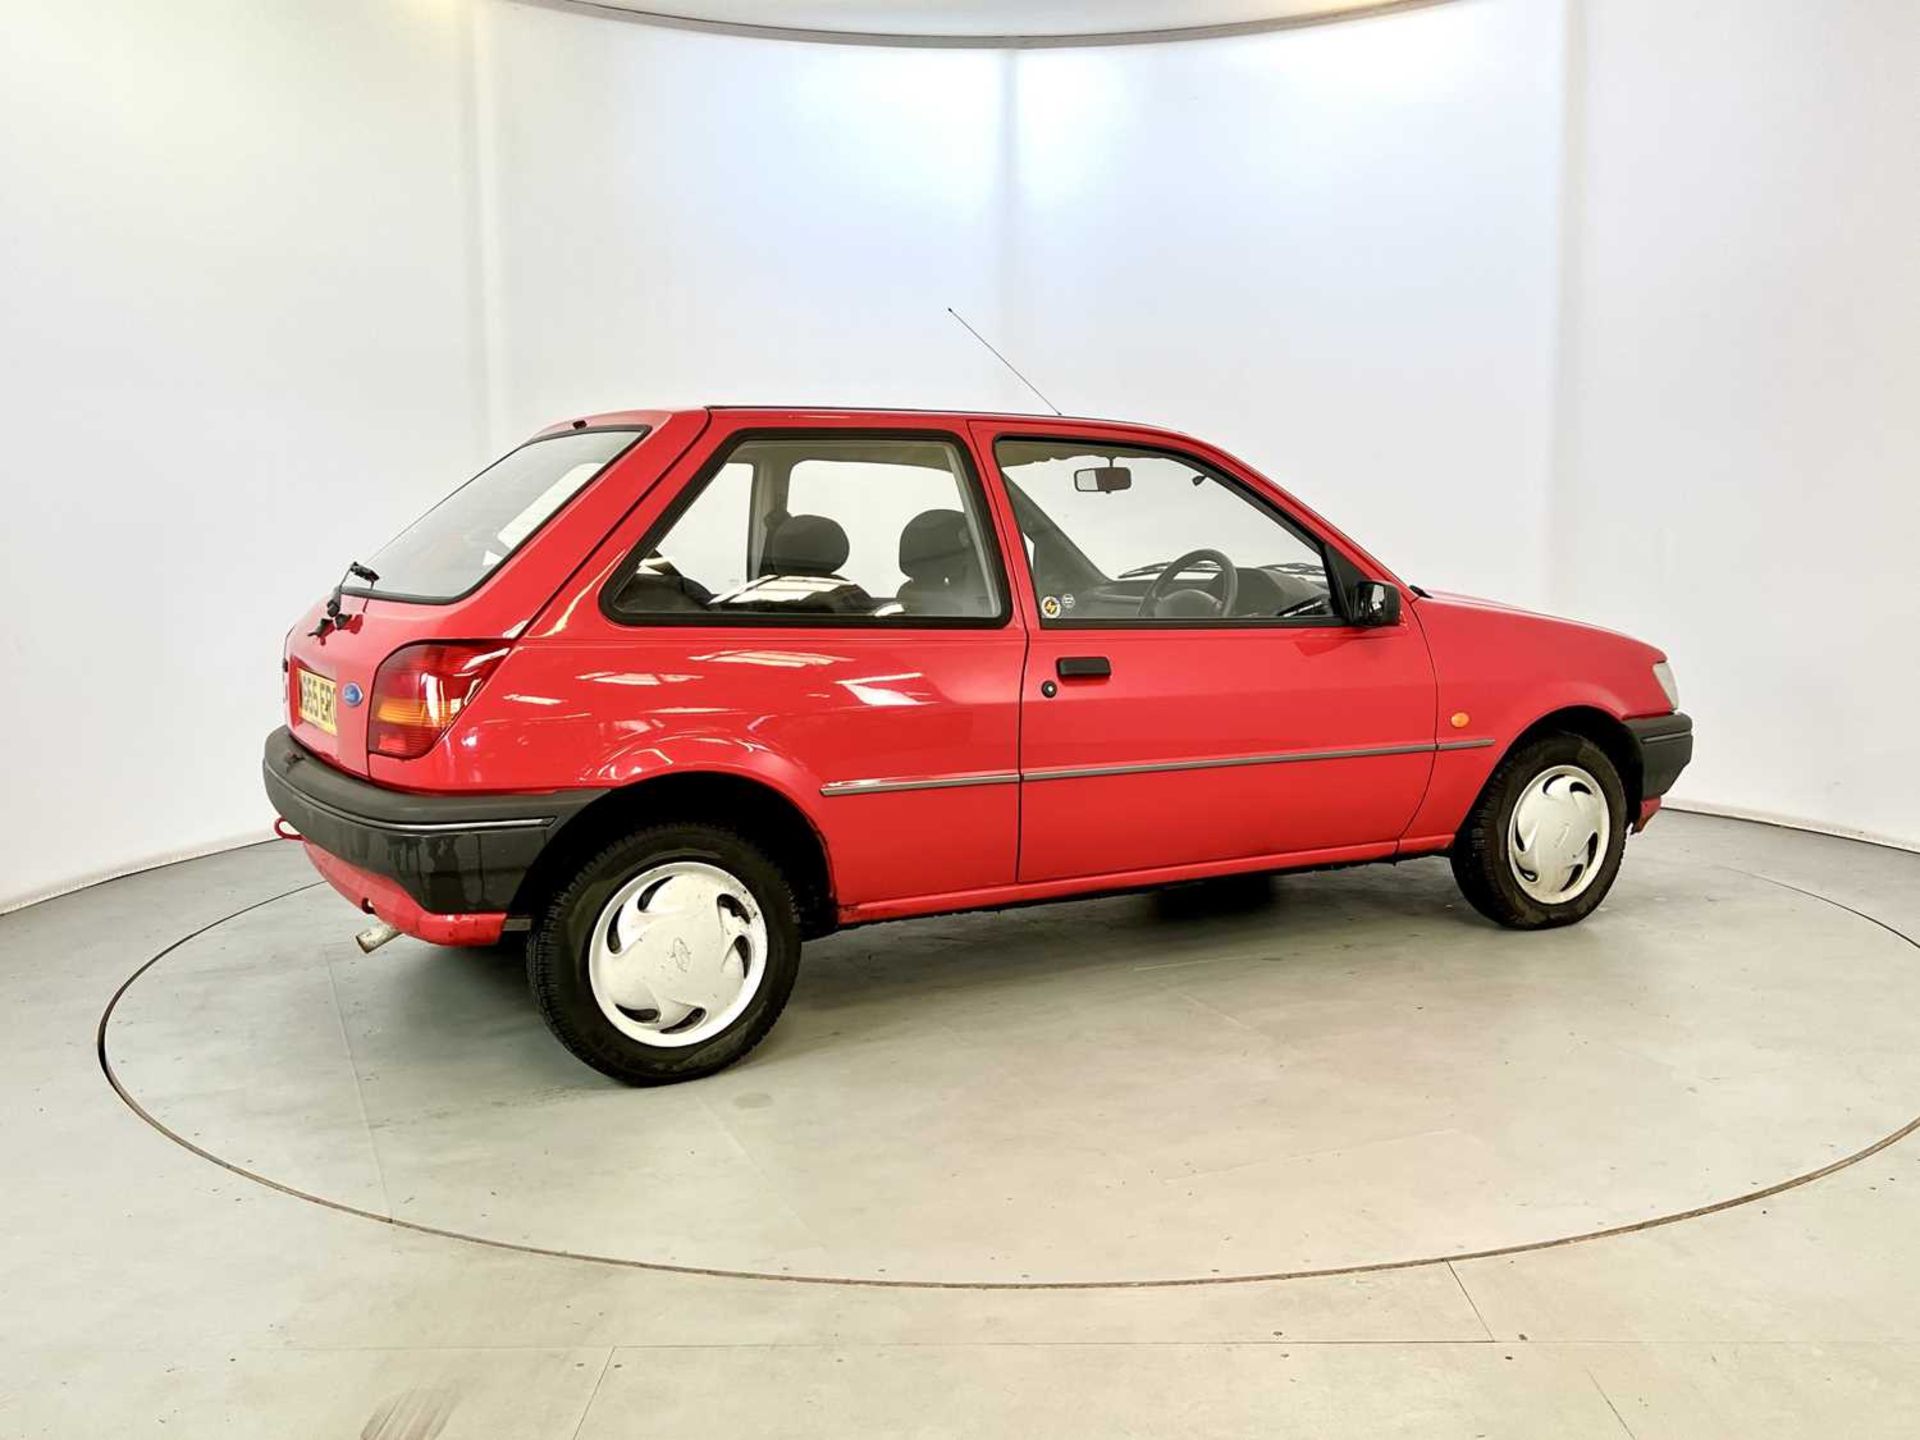 1994 Ford Fiesta Sapphire - Image 10 of 27